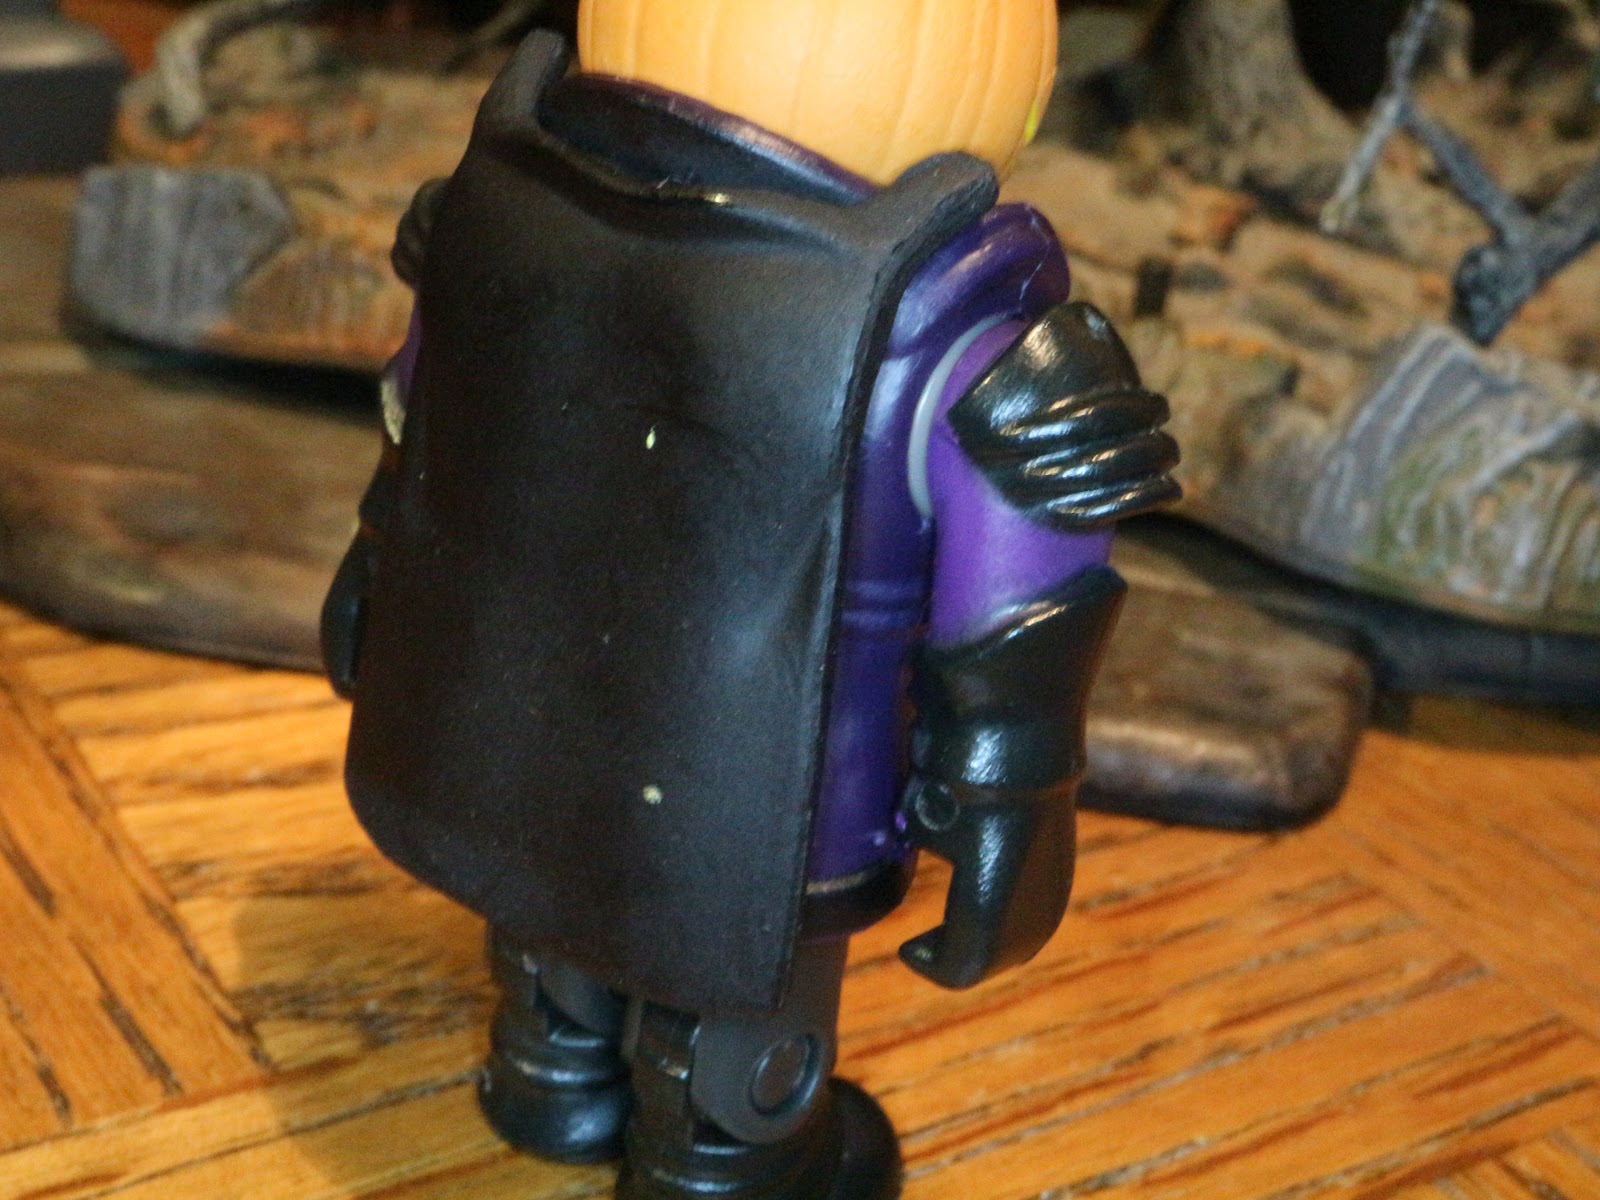 Action Figure Barbecue The Revenge Of 31 Days Of Toy Terror - roblox headless horseman figure